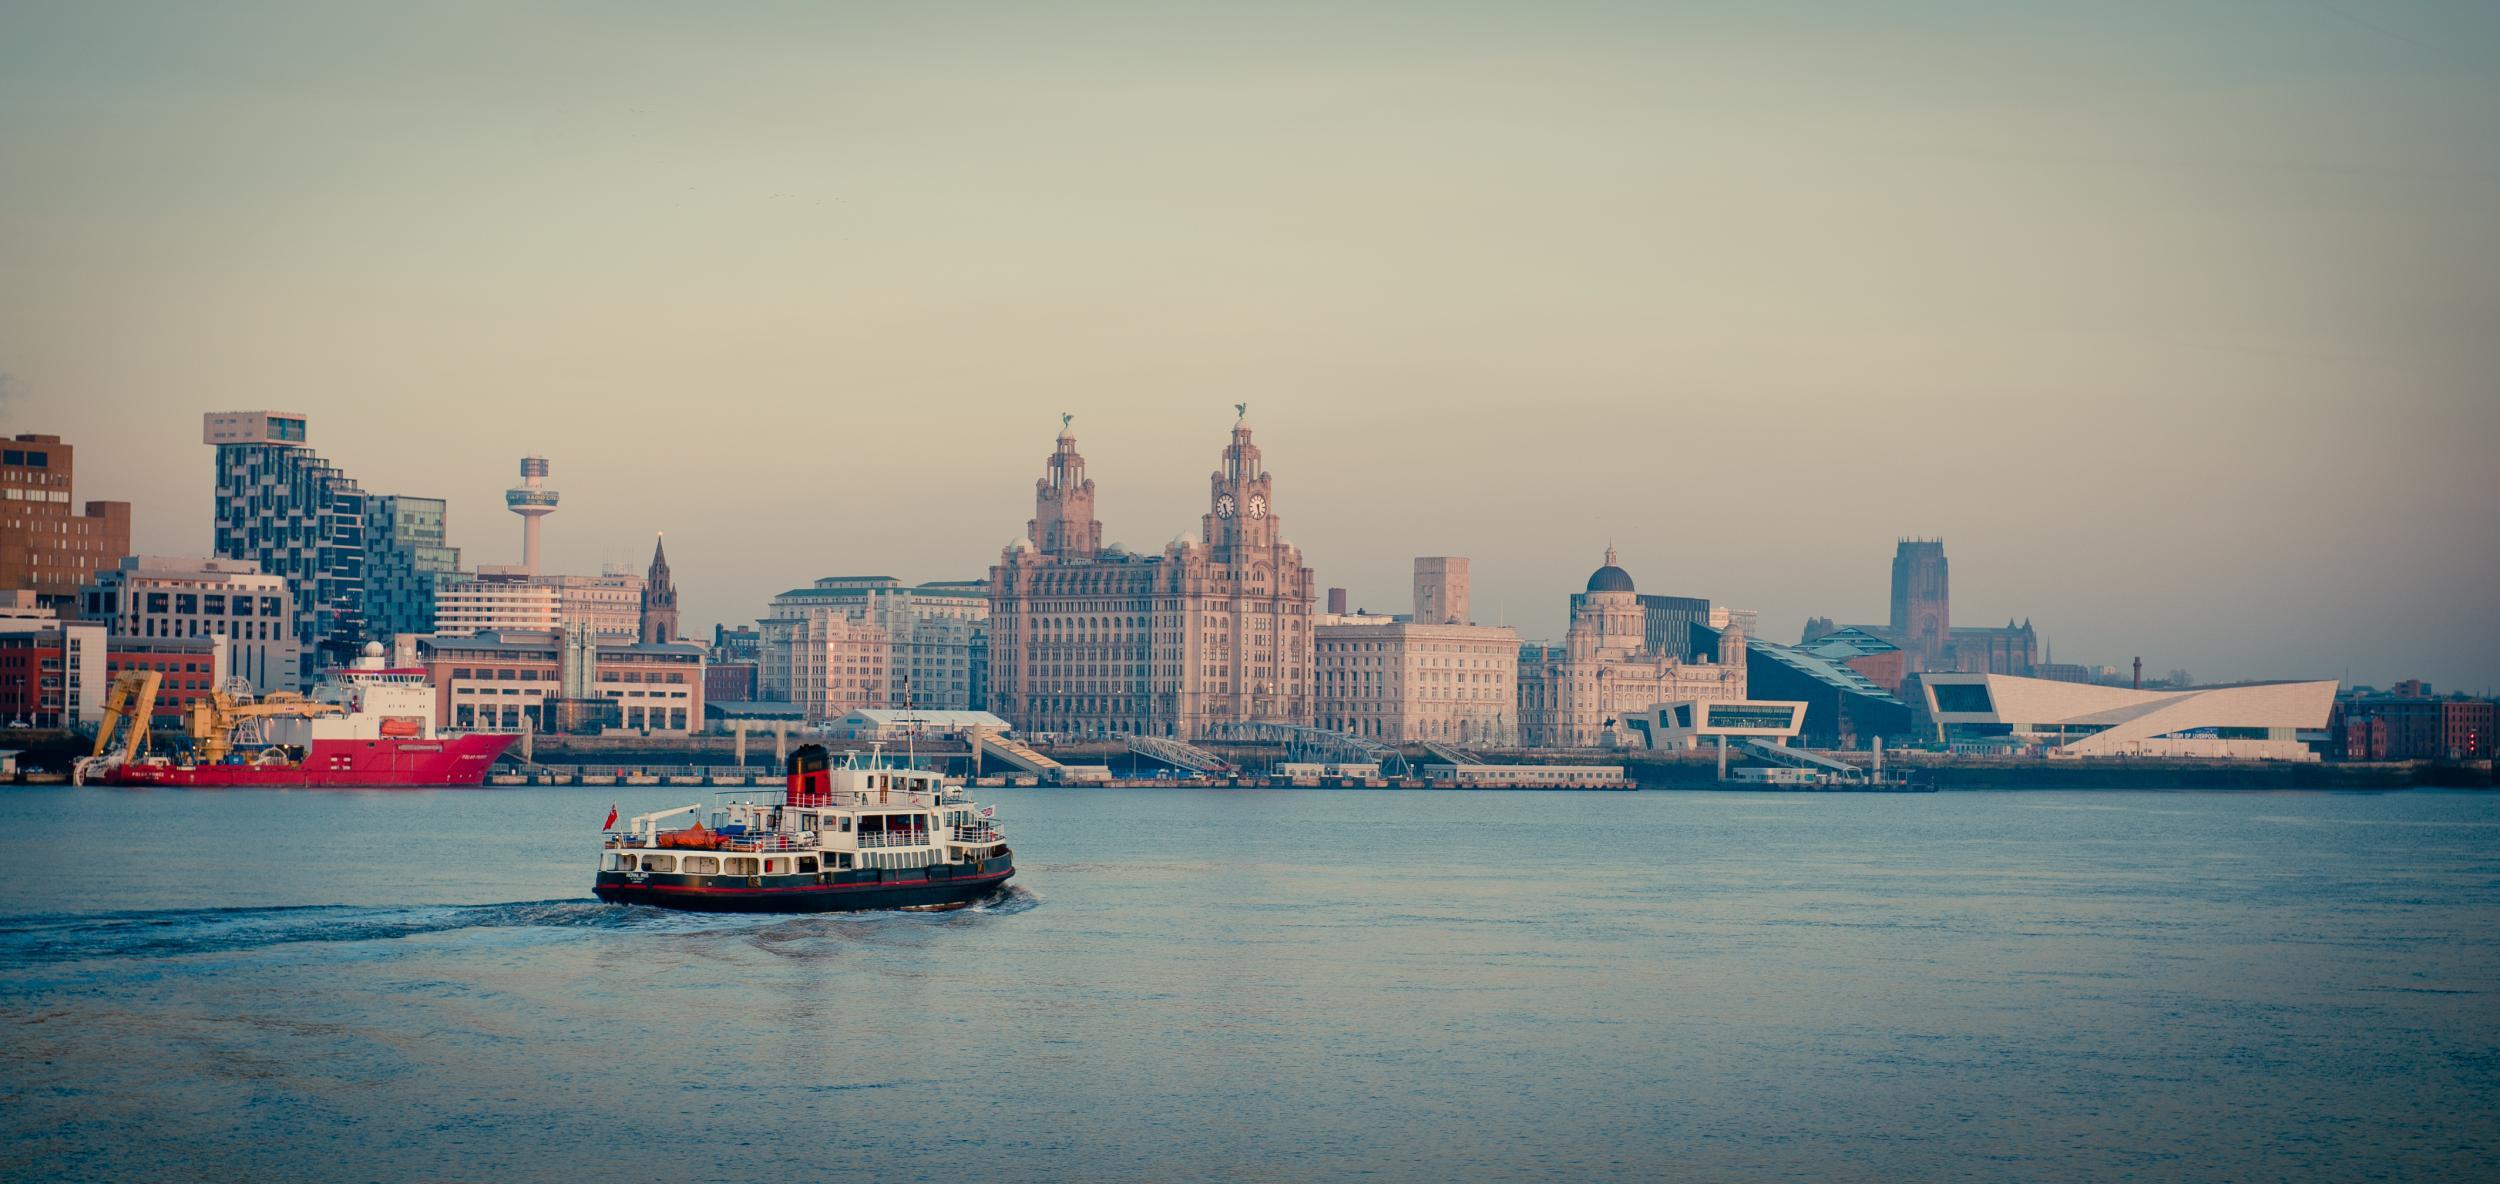 According to Unesco, parts of Liverpool are an endangered World Heritage Site